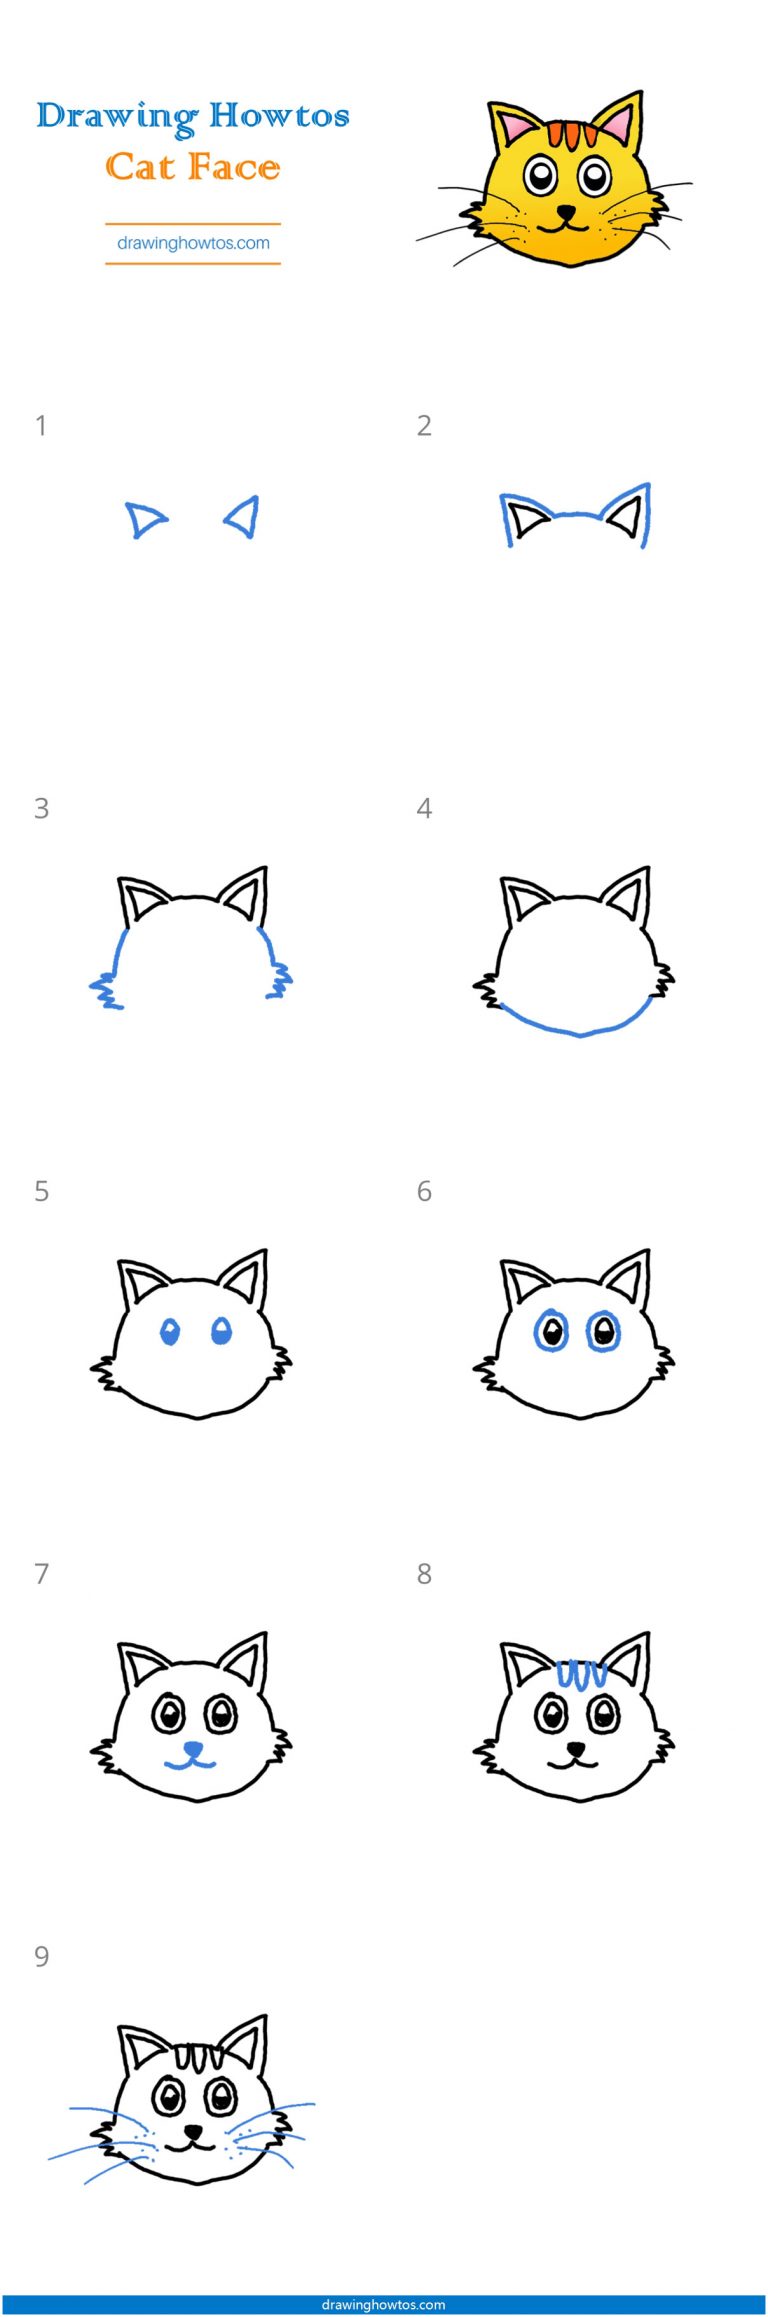 How to Draw a Cat Face - Step by Step Easy Drawing Guides - Drawing Howtos